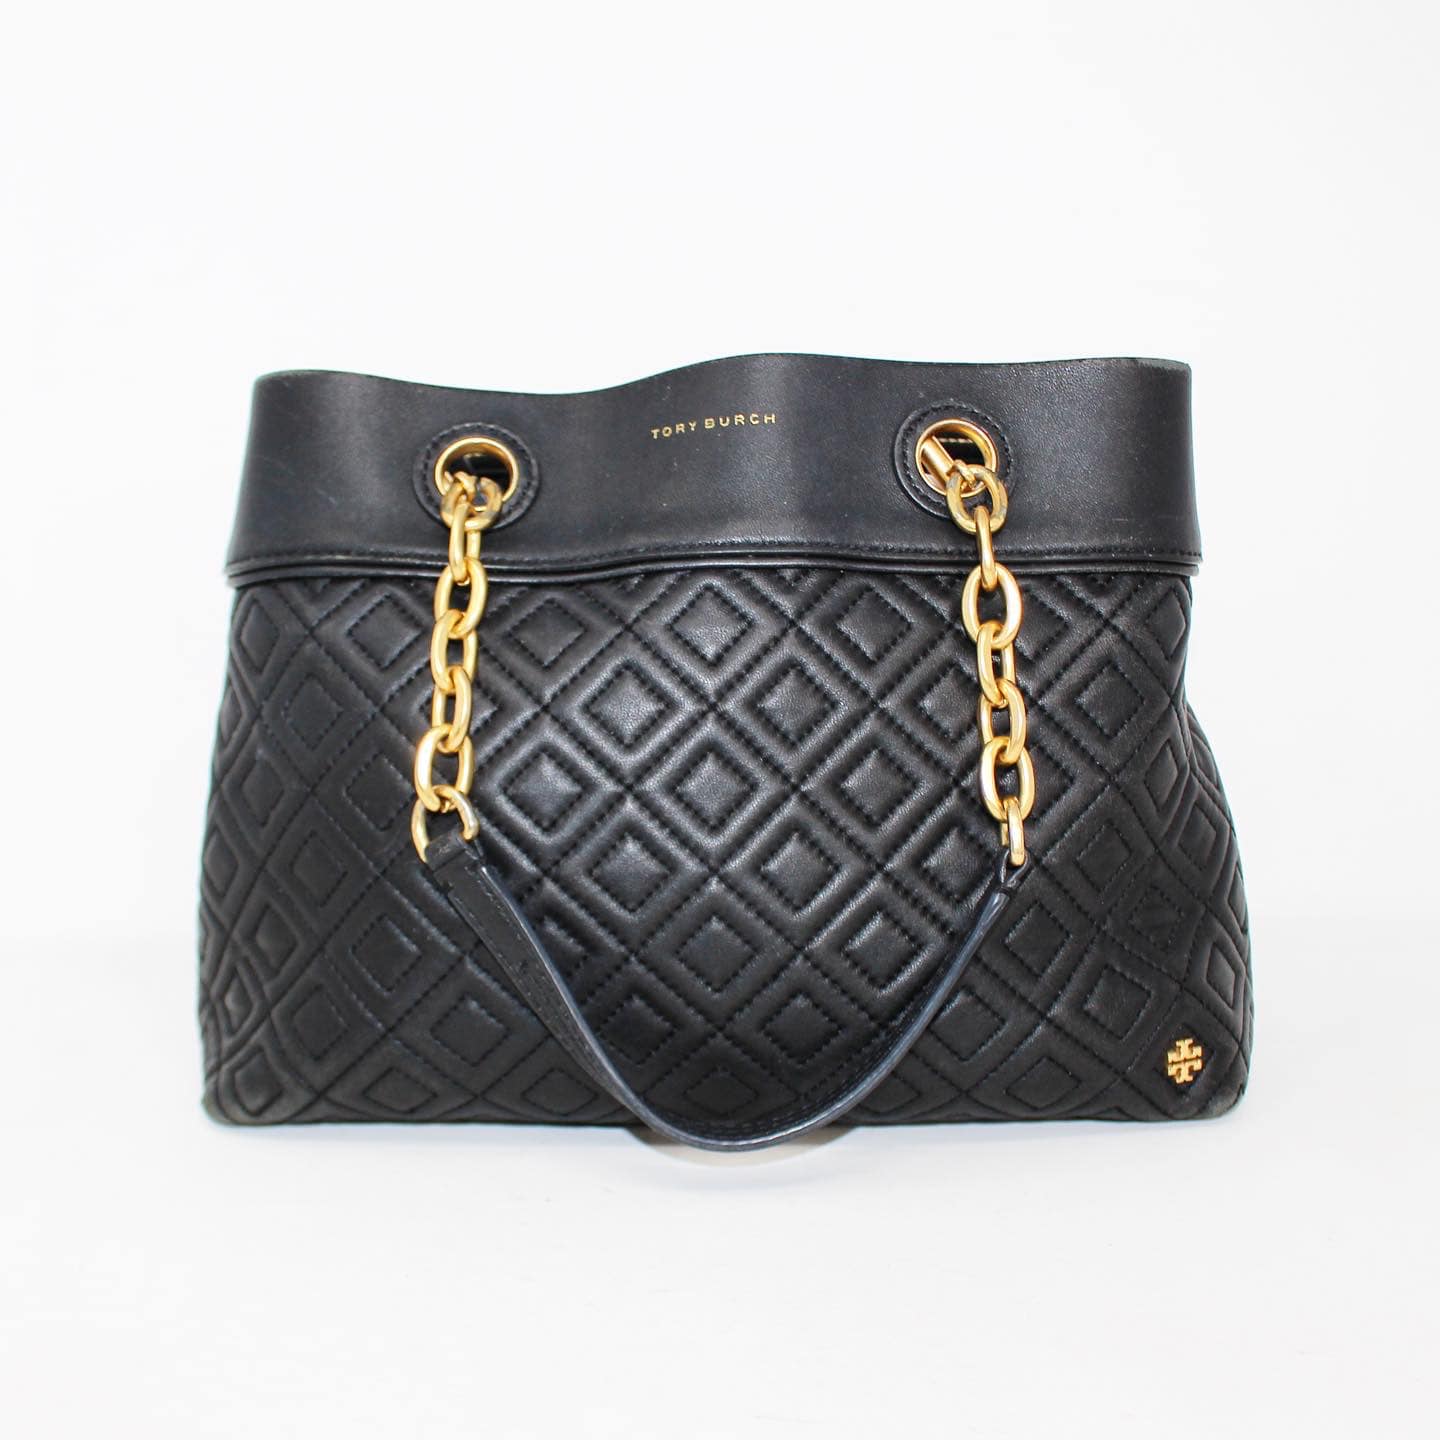 Fleming Small Hobo Bag - Tory Burch - Black/Silver - Leather